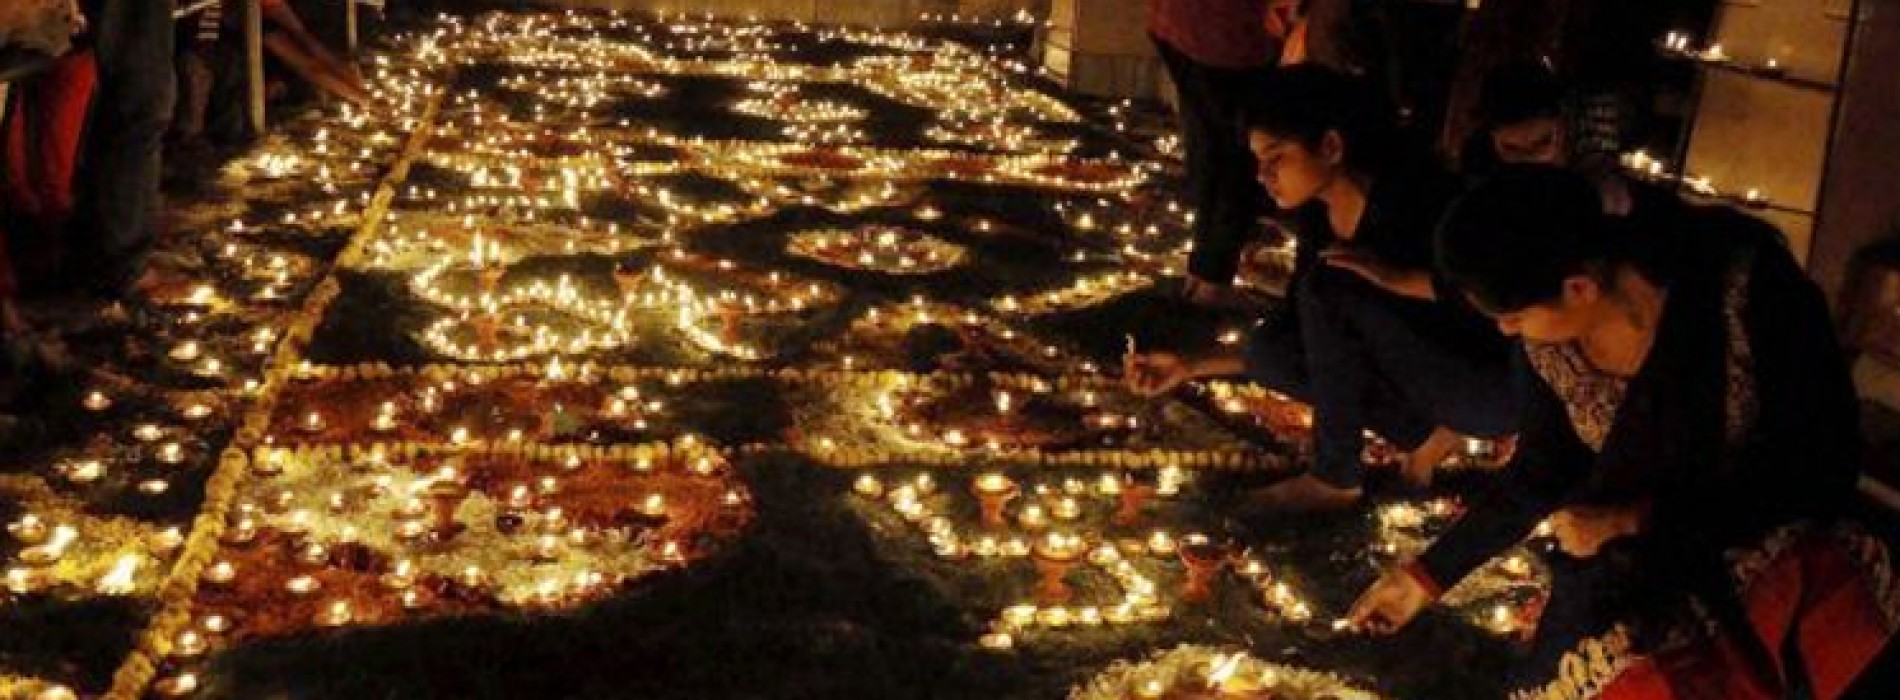 Diwali Celebrations in Different Regions of India